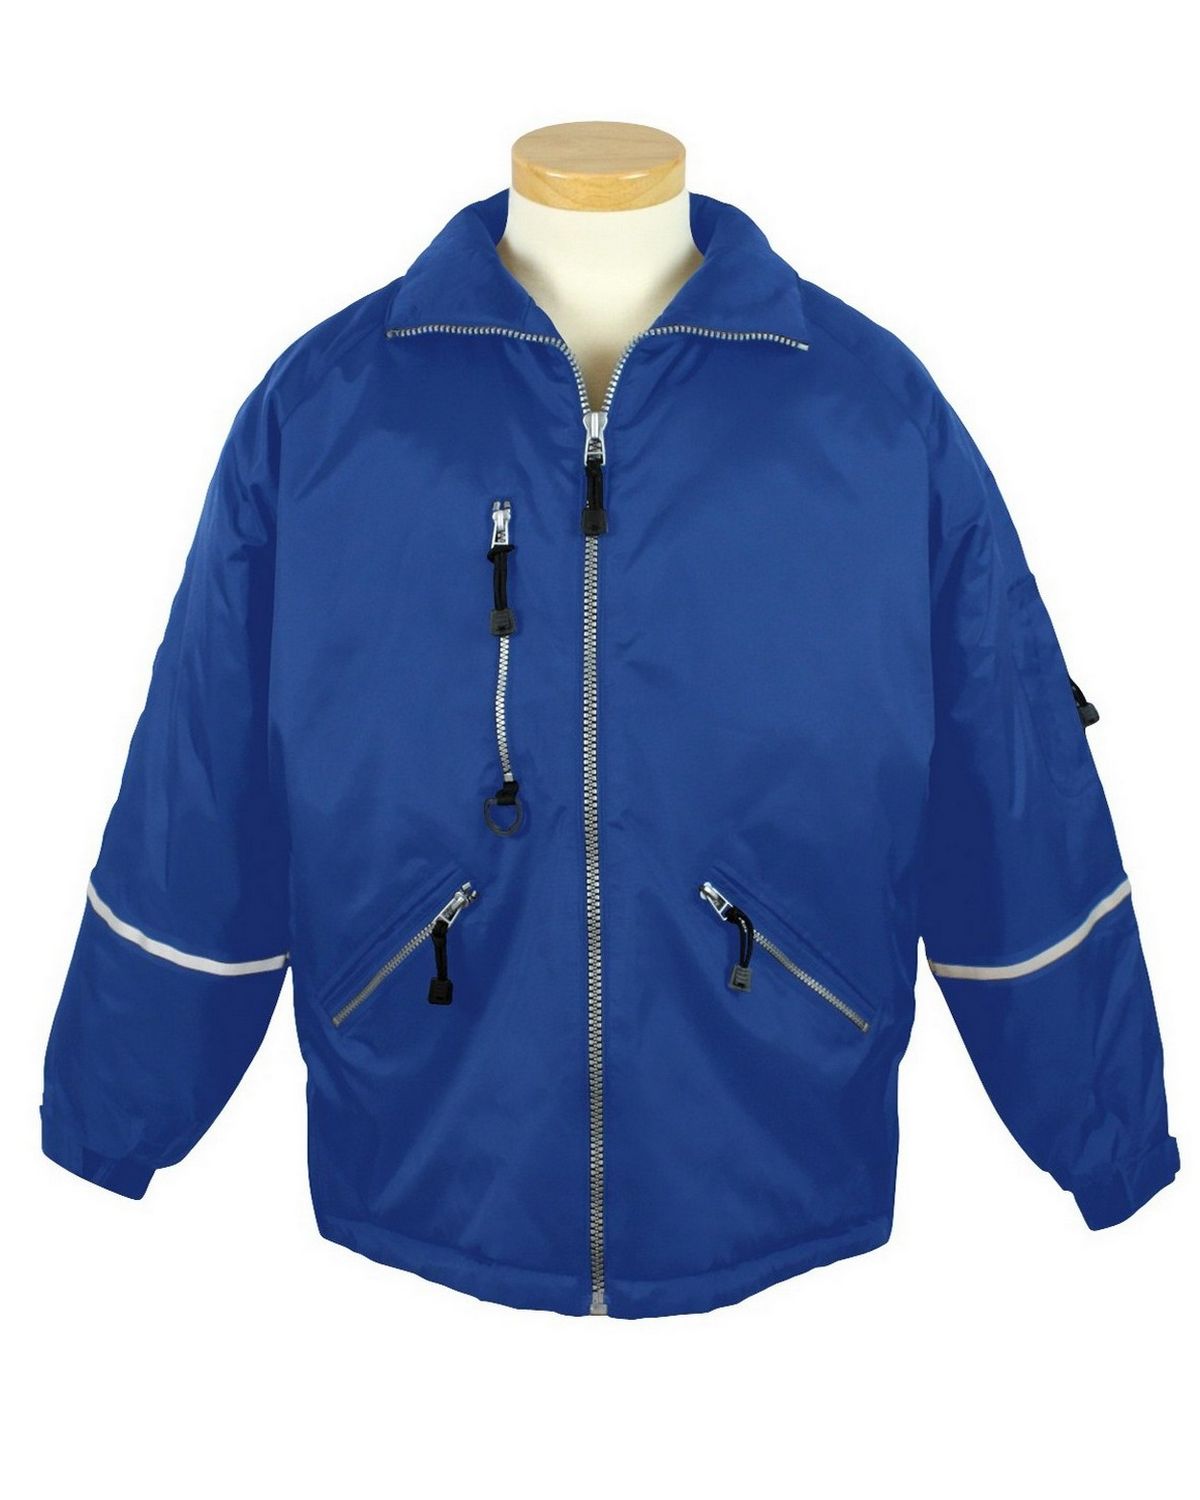 Tri-Mountain 8930 Courier Nylon Jacket with Reflective Tape ...